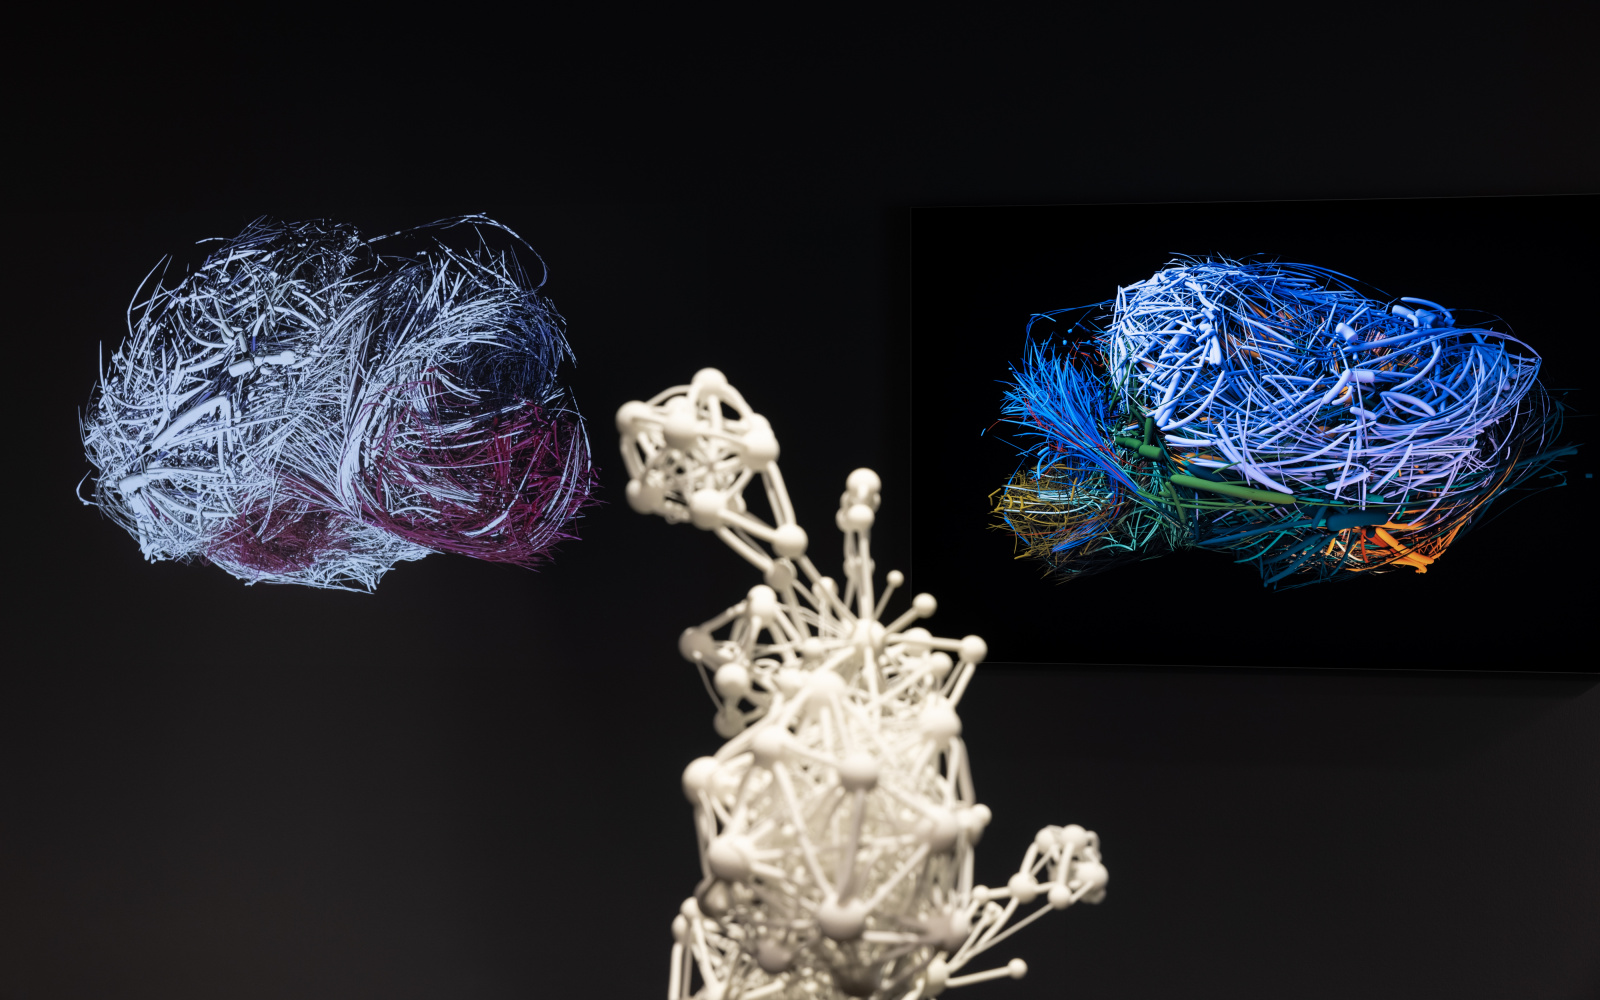 In the foreground is a medium-sized sculpture showing a network with many nodes. To the left and right of the sculpture are networks in the form of a mouse brain.